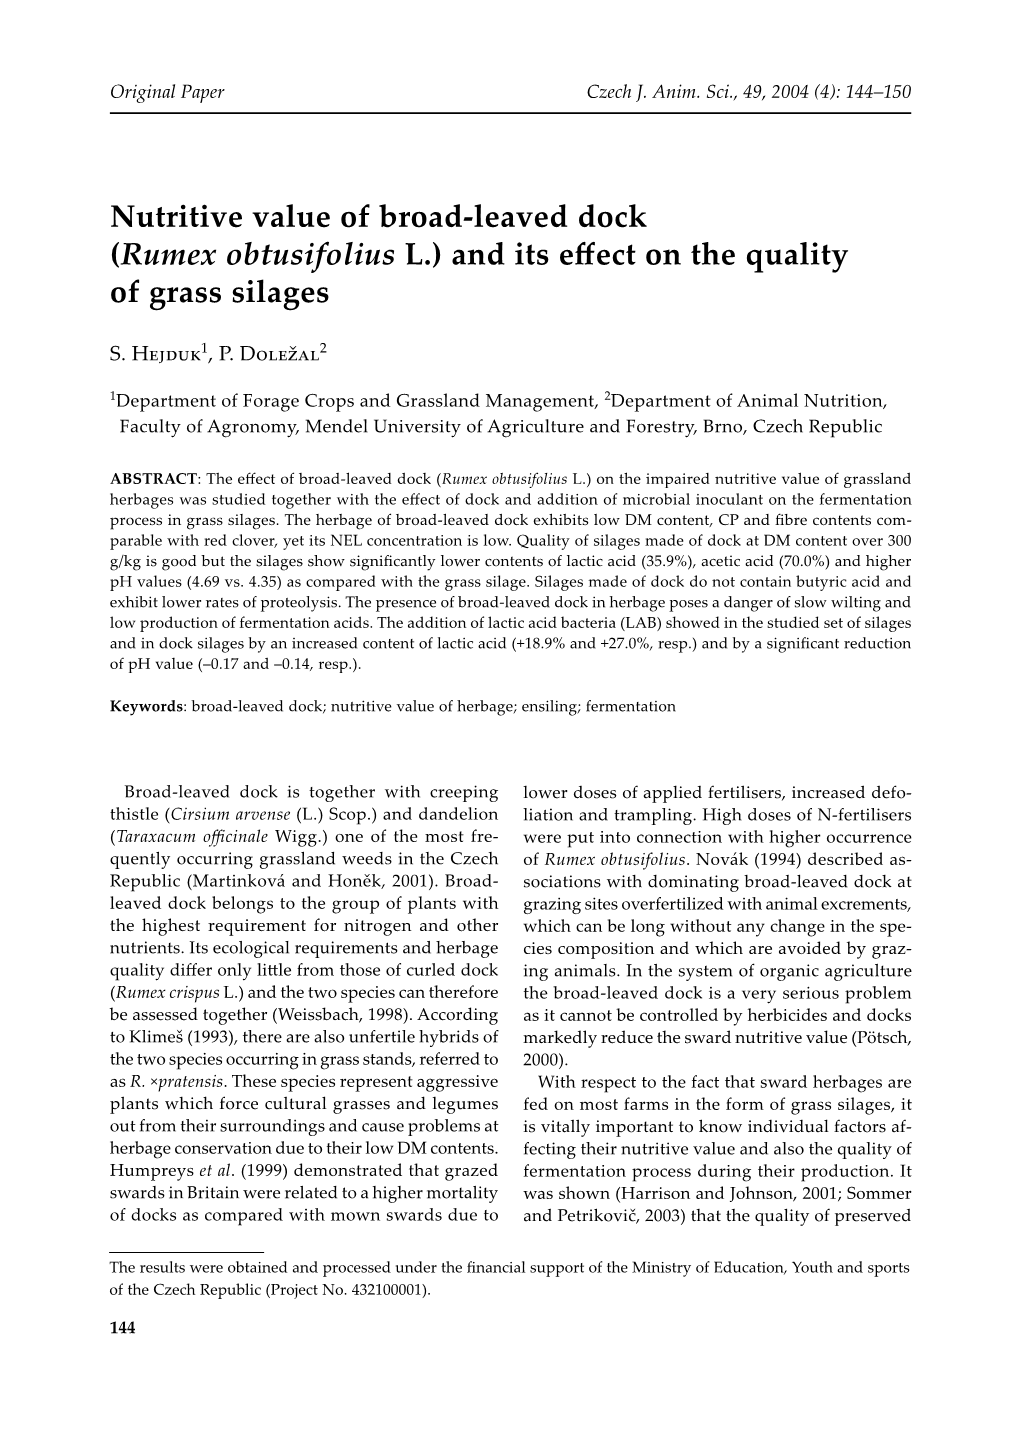 Nutritive Value of Broad-Leaved Dock (Rumex Obtusifolius L.) and Its Effect on the Quality of Grass Silages